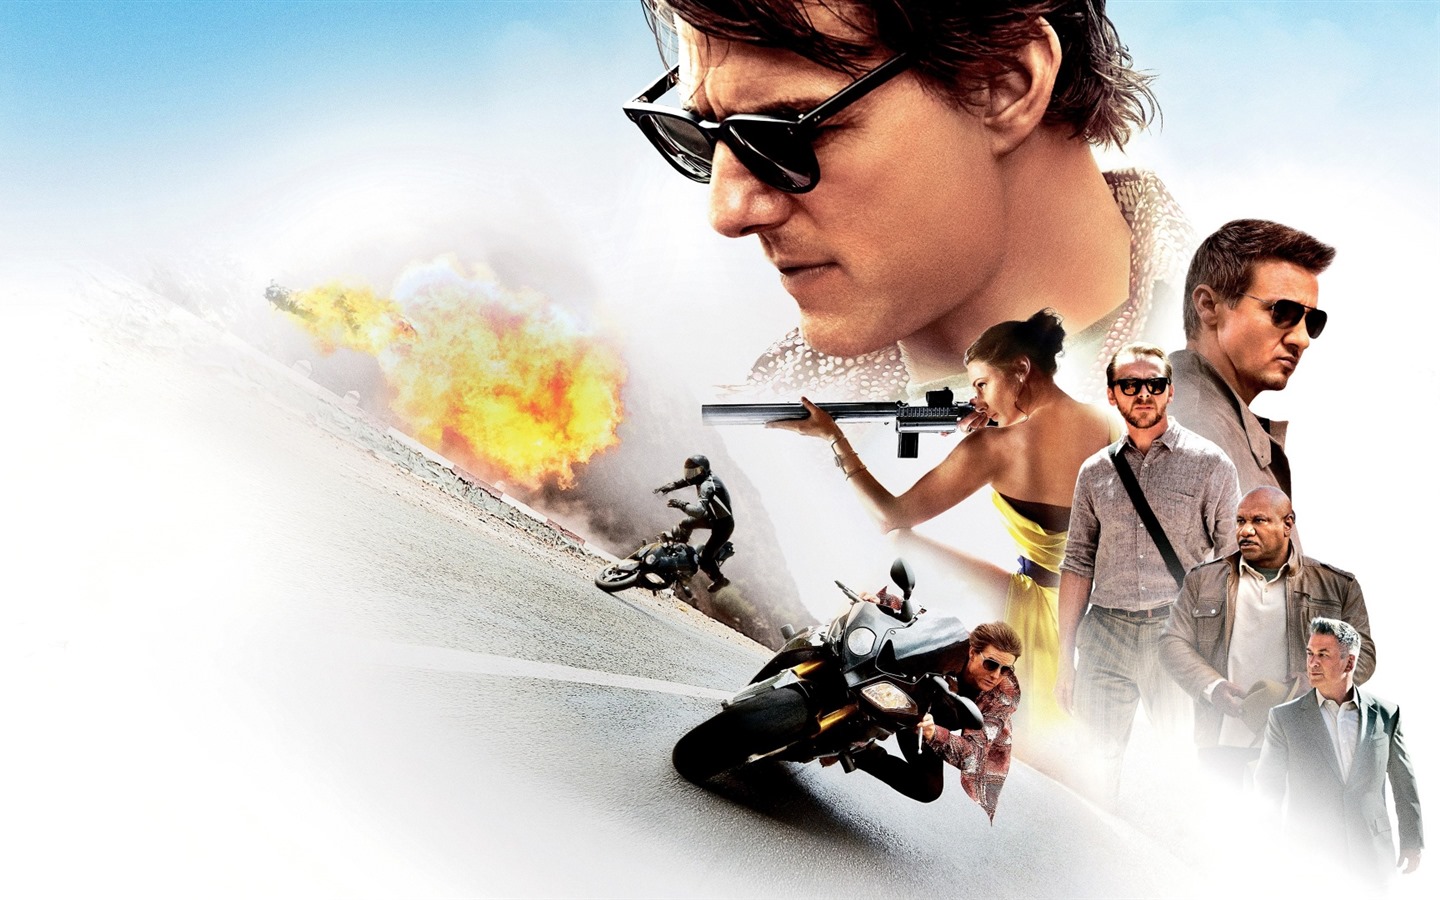 Mission Impossible: Rogue Nation, HD movie wallpapers #1 - 1440x900